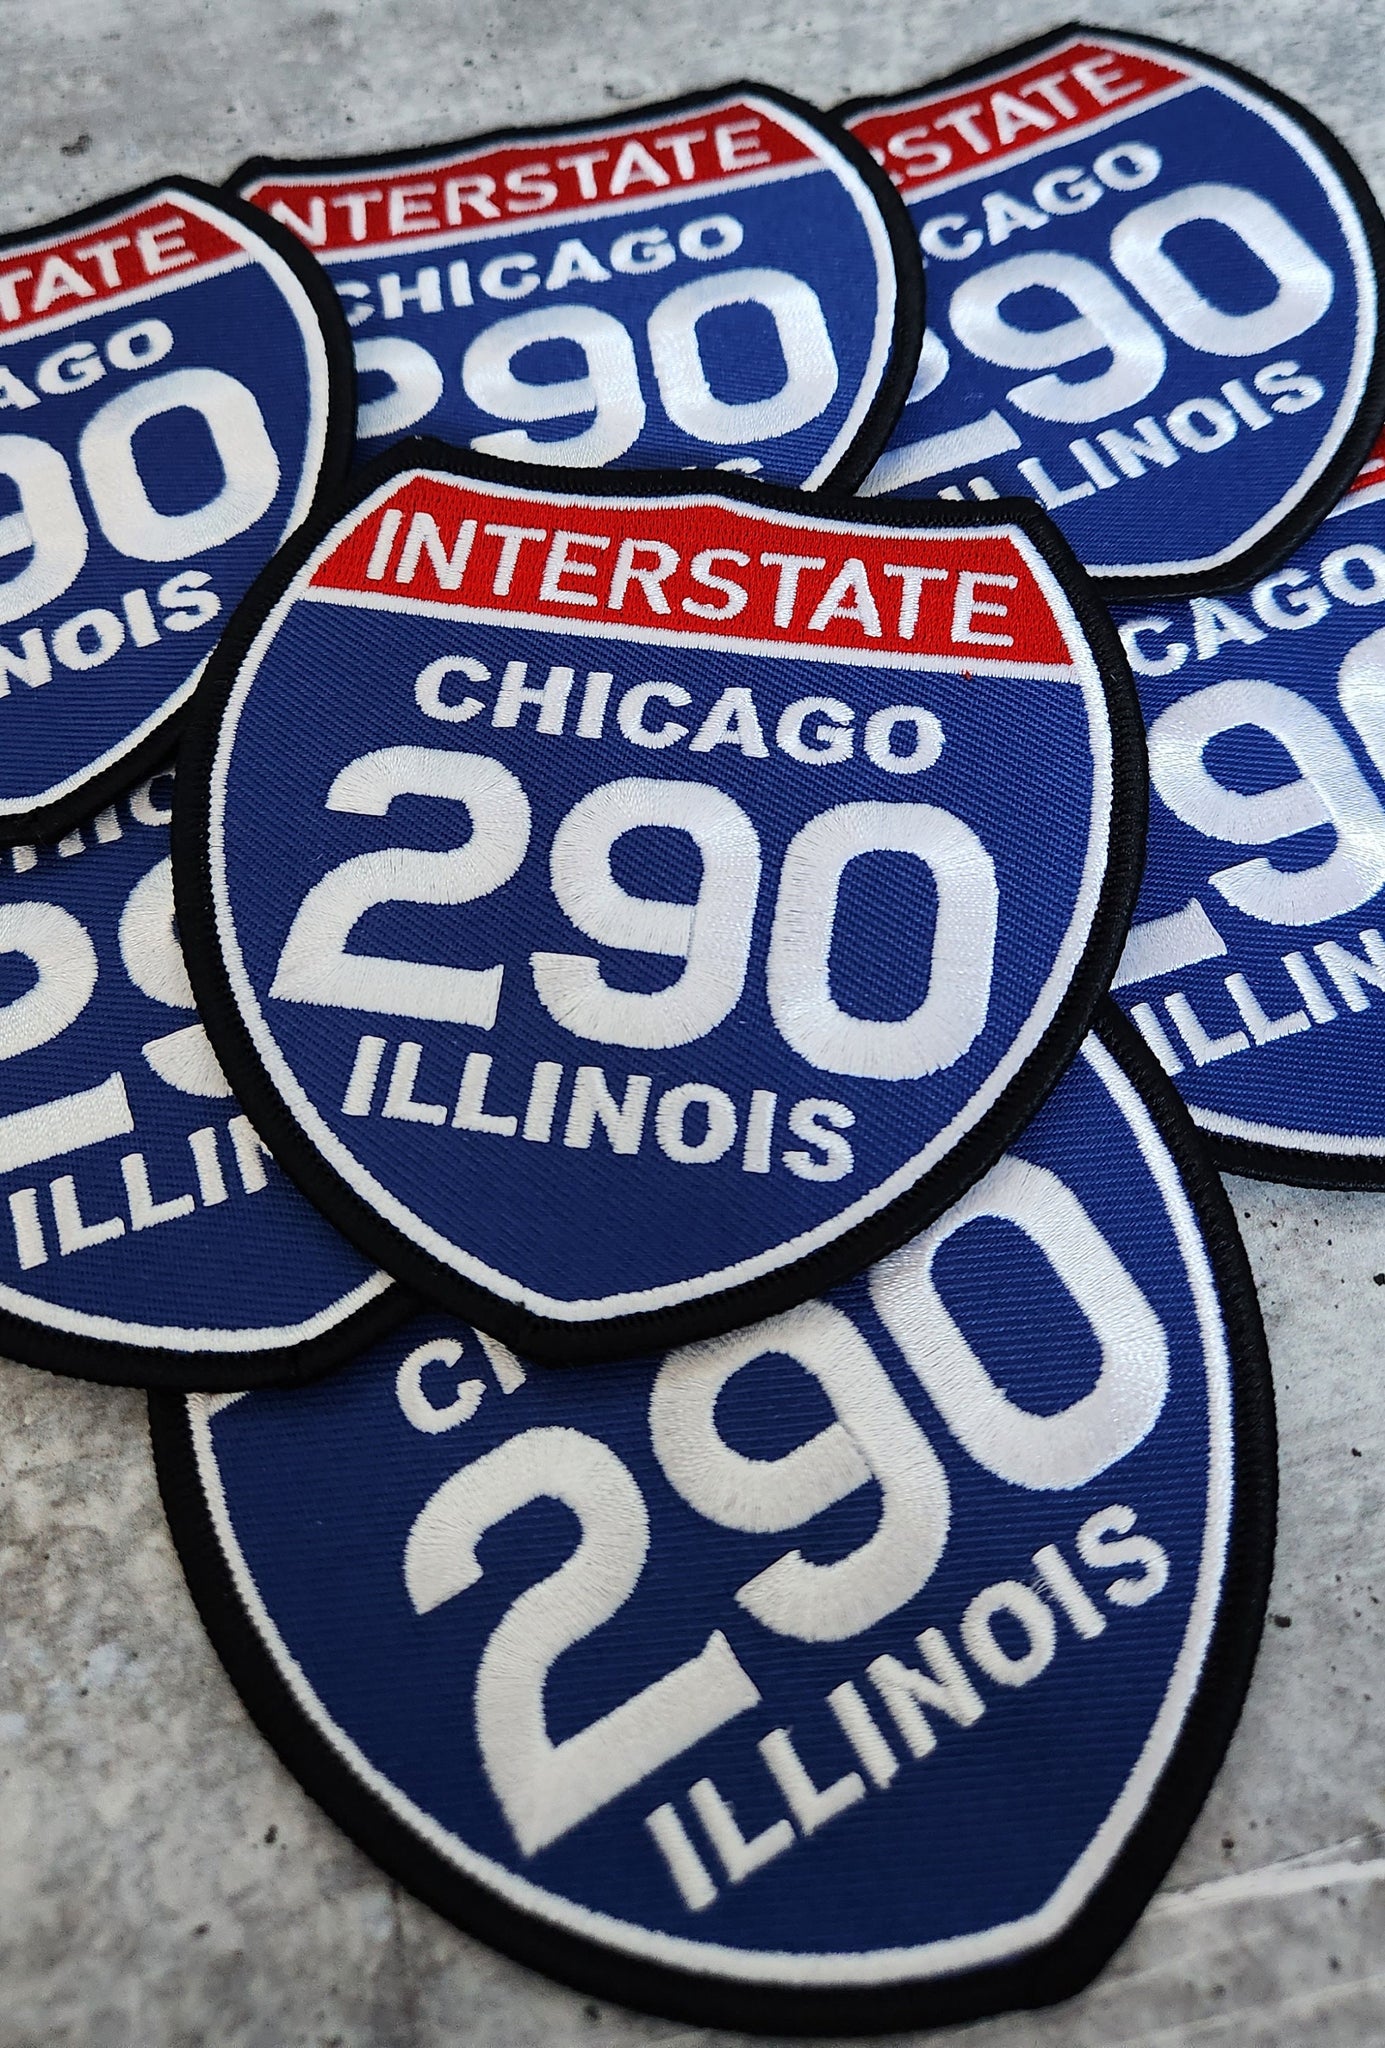 Collectable 1-pc, "CHICAGO 4" Interstate 290" Iron-On Embroidered Patch; Popular Chicago Emblem, Red/White/Blue Badge, Patch for Jackets